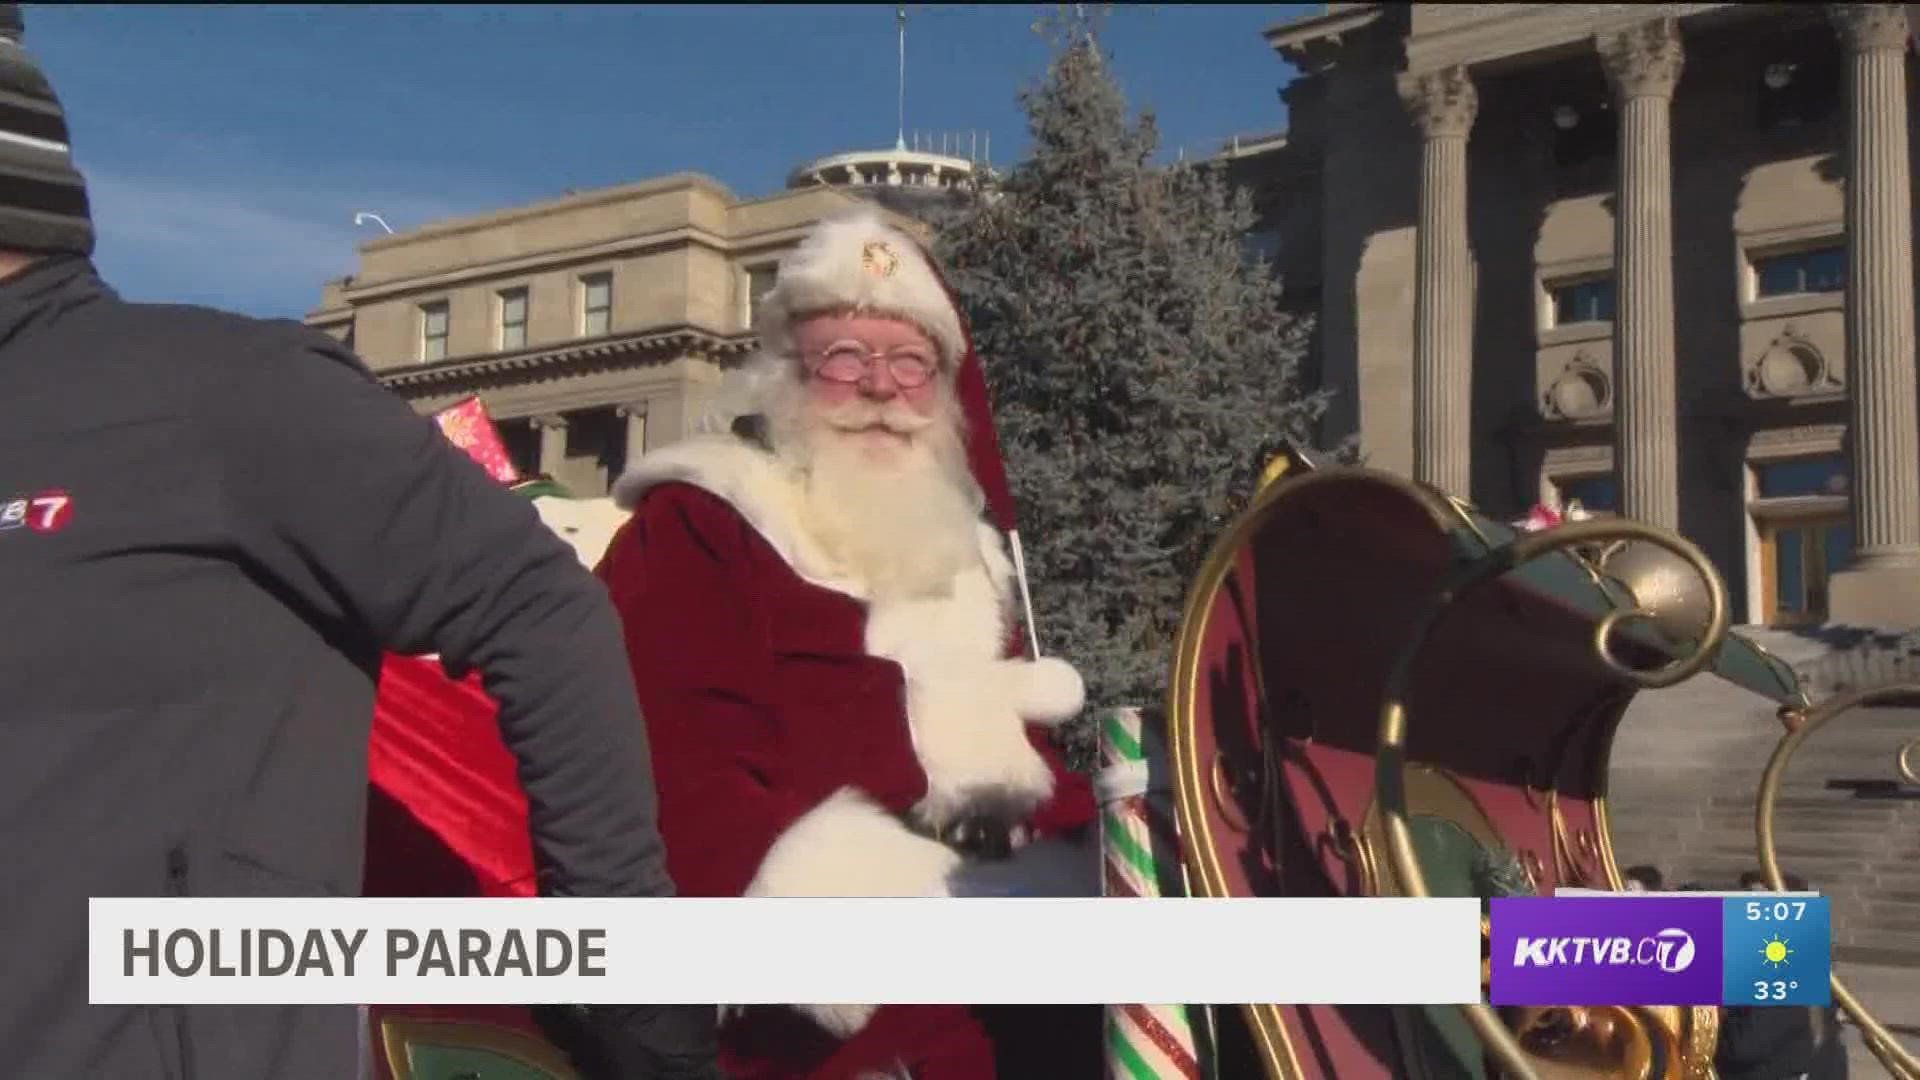 The 2022 Boise Holiday Parade brings the Christmas spirit to downtown Boise Saturday morning with locally-built floats, dance teams, choirs, cars and more.